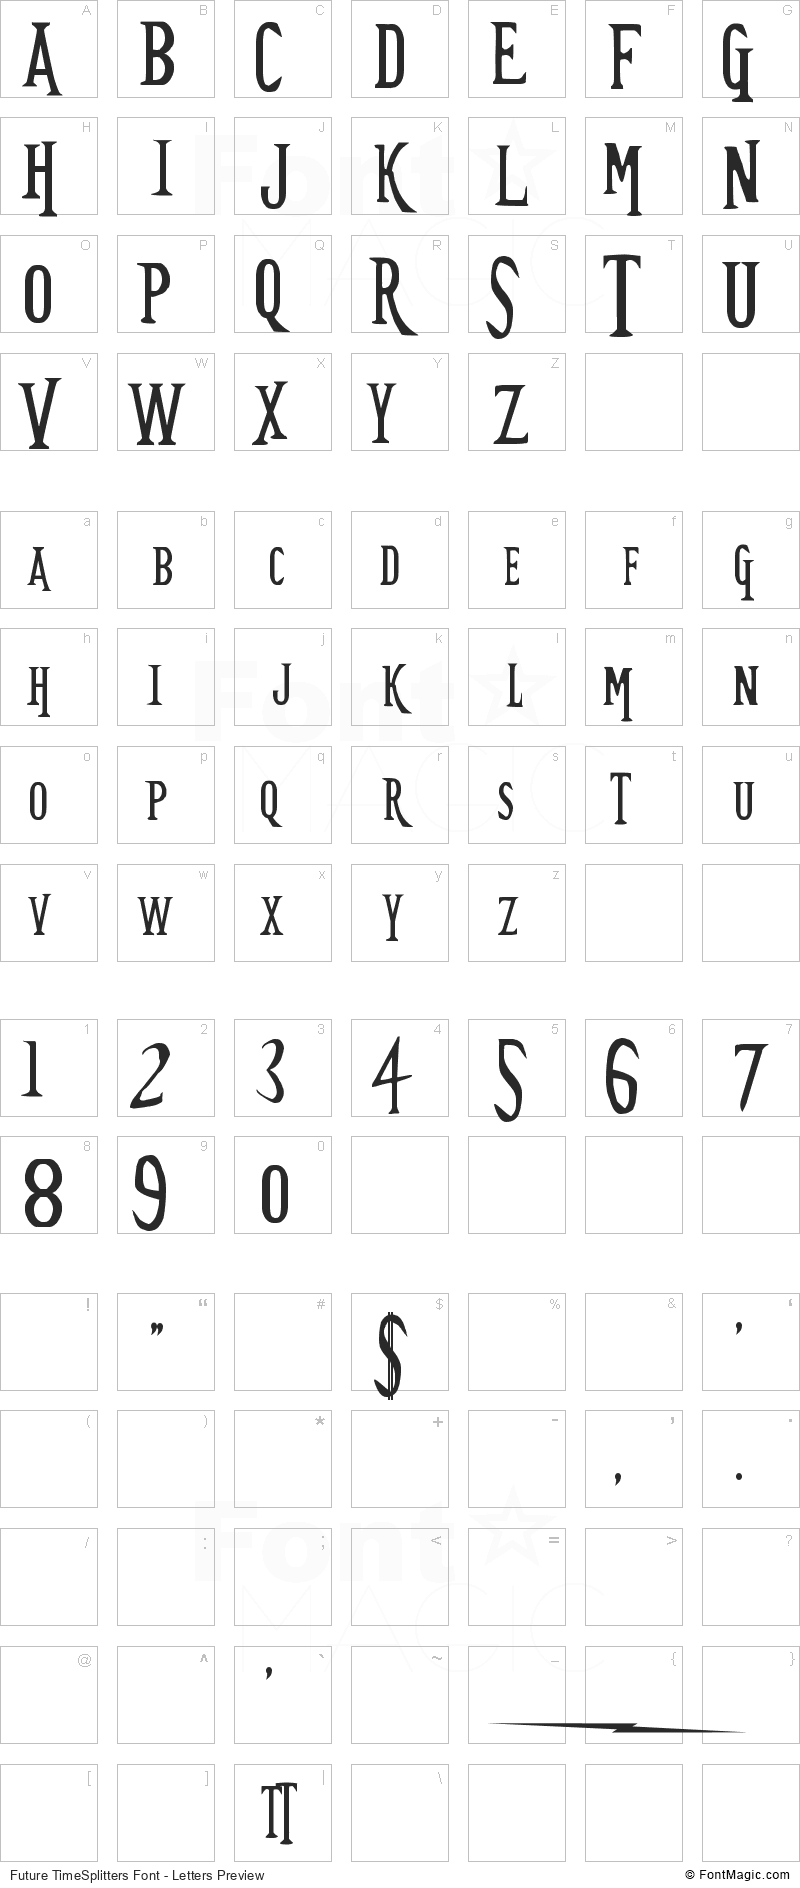 Future TimeSplitters Font - All Latters Preview Chart